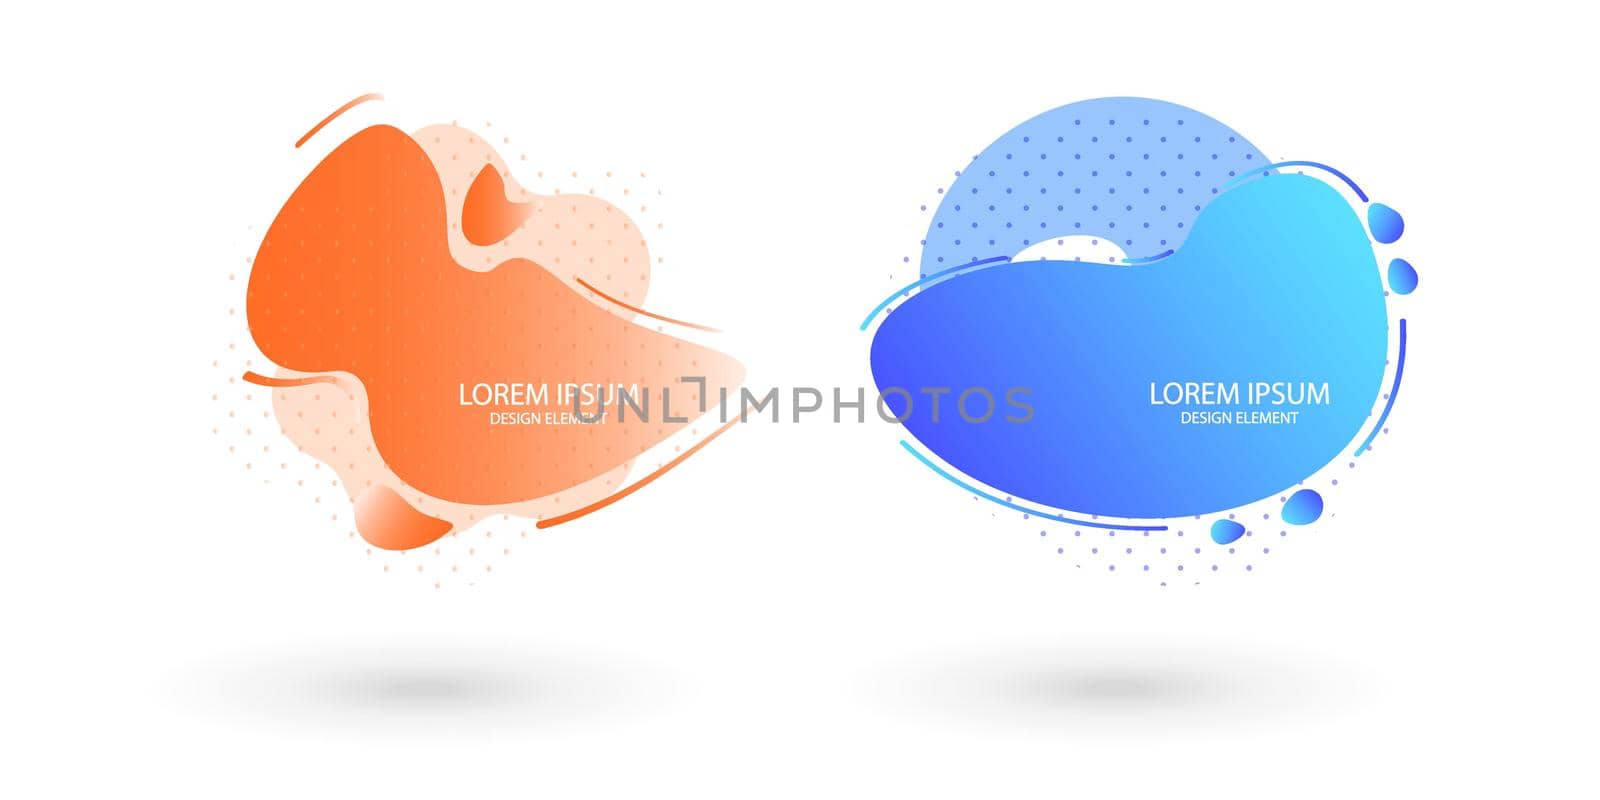 Fluid frame isolated on white background. Set of abstract liquid shapes, colorful elements, gradient waves with geometric lines, dynamical forms. Vector flat design for banners, flyers, business card.